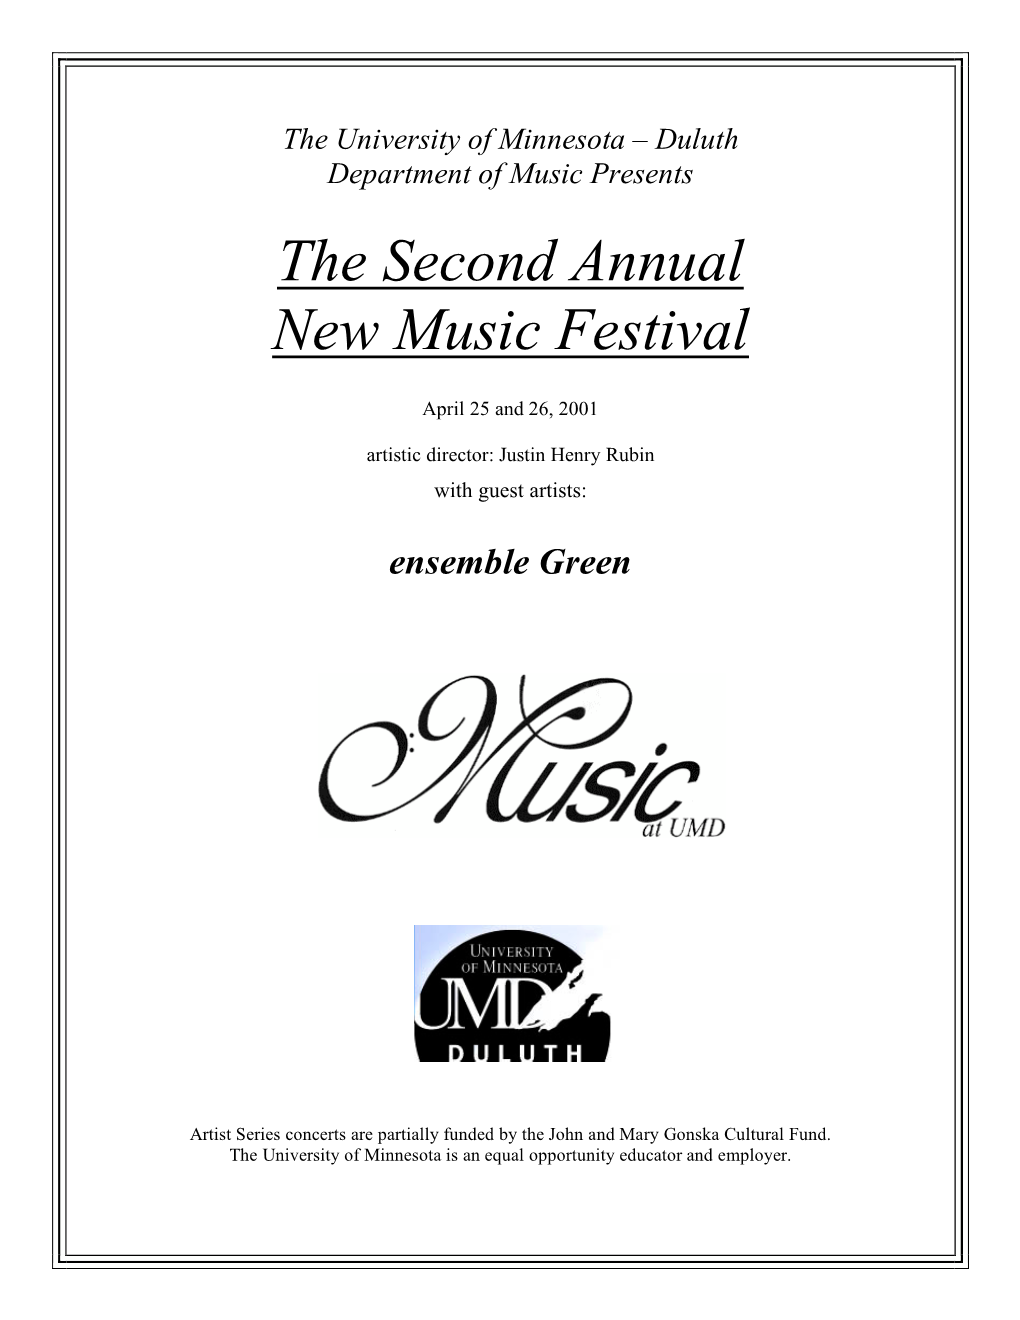 The Second Annual New Music Festival